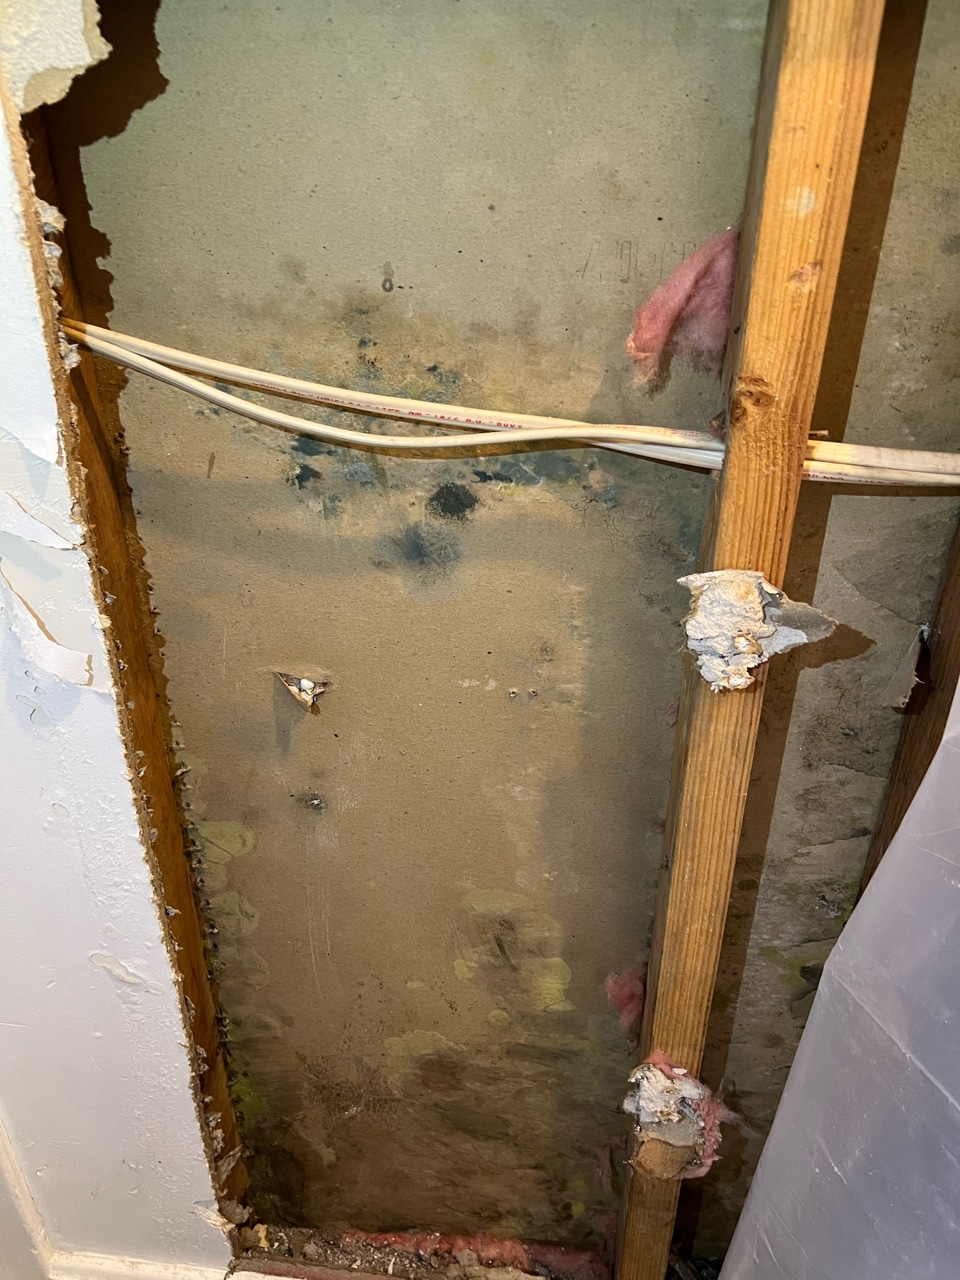 Does Mold Have to be Removed Professionally?